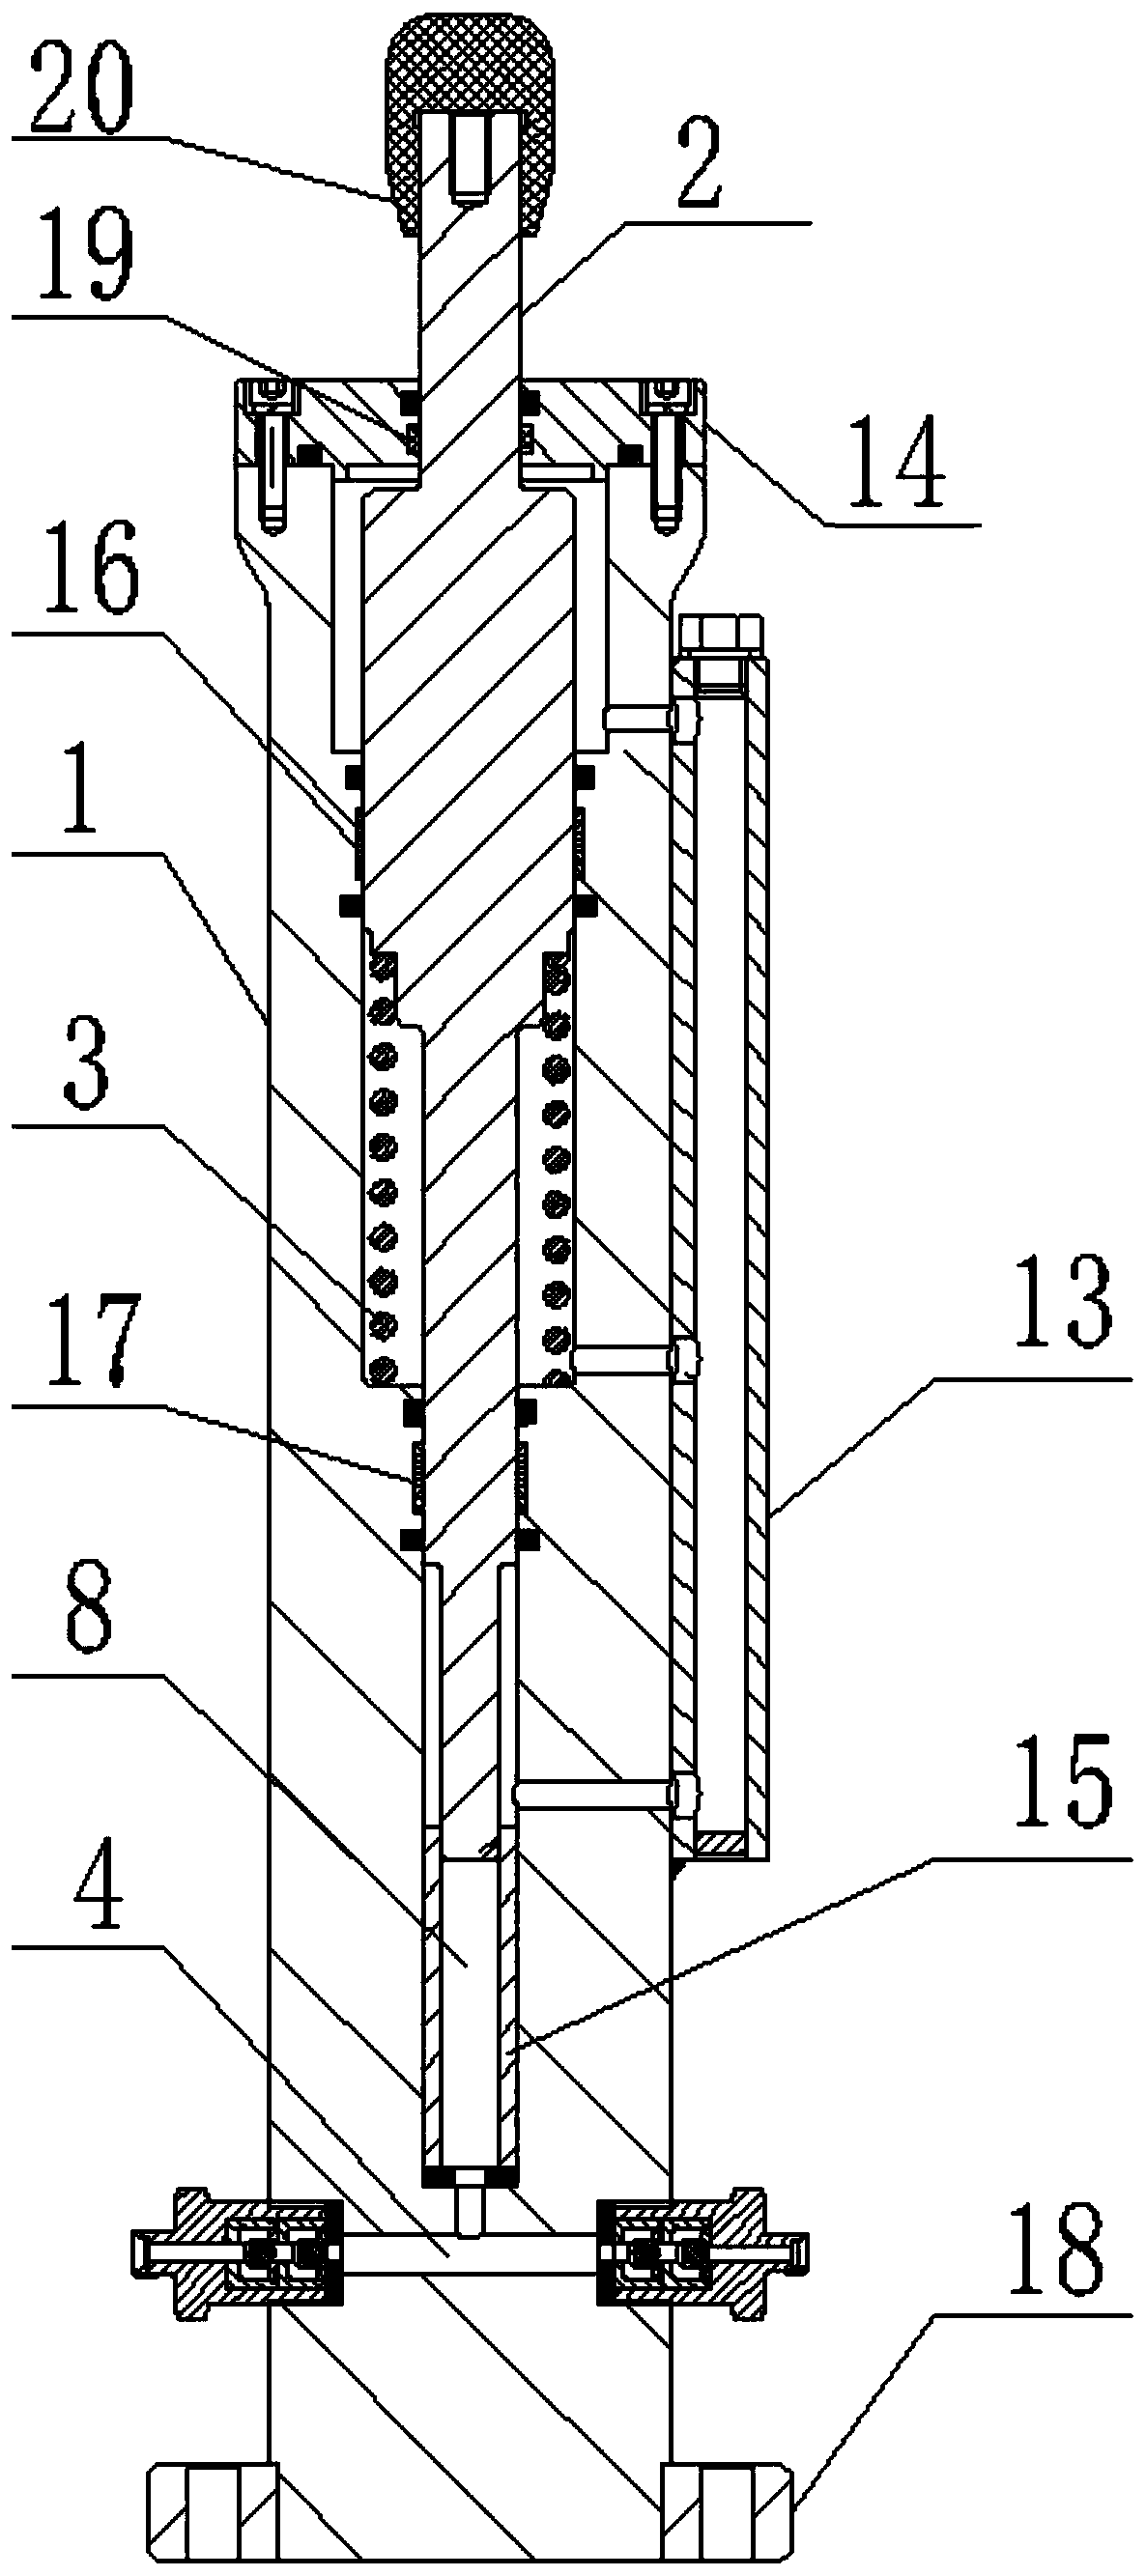 Integrated wellhead continuous dosing device